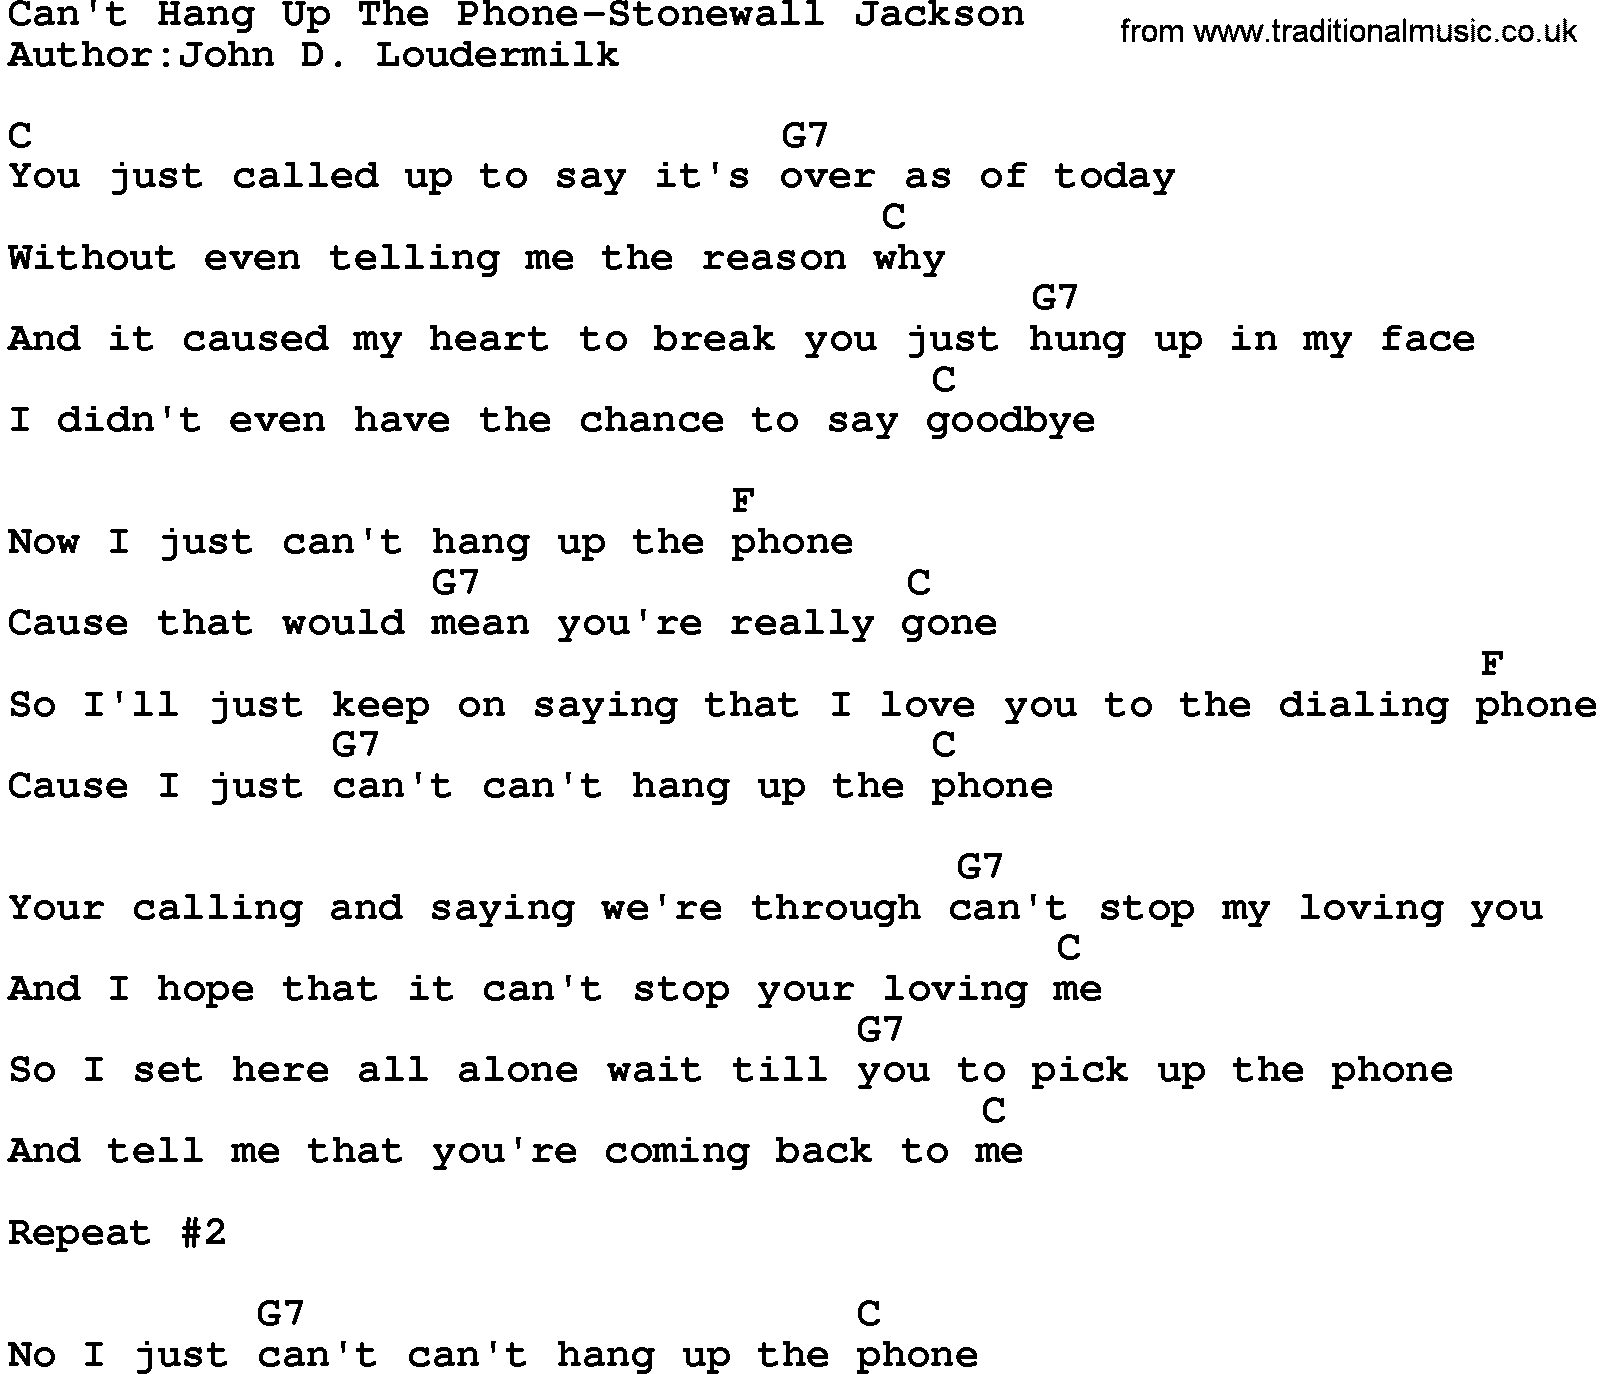 Country music song: Can't Hang Up The Phone-Stonewall Jackson lyrics and chords